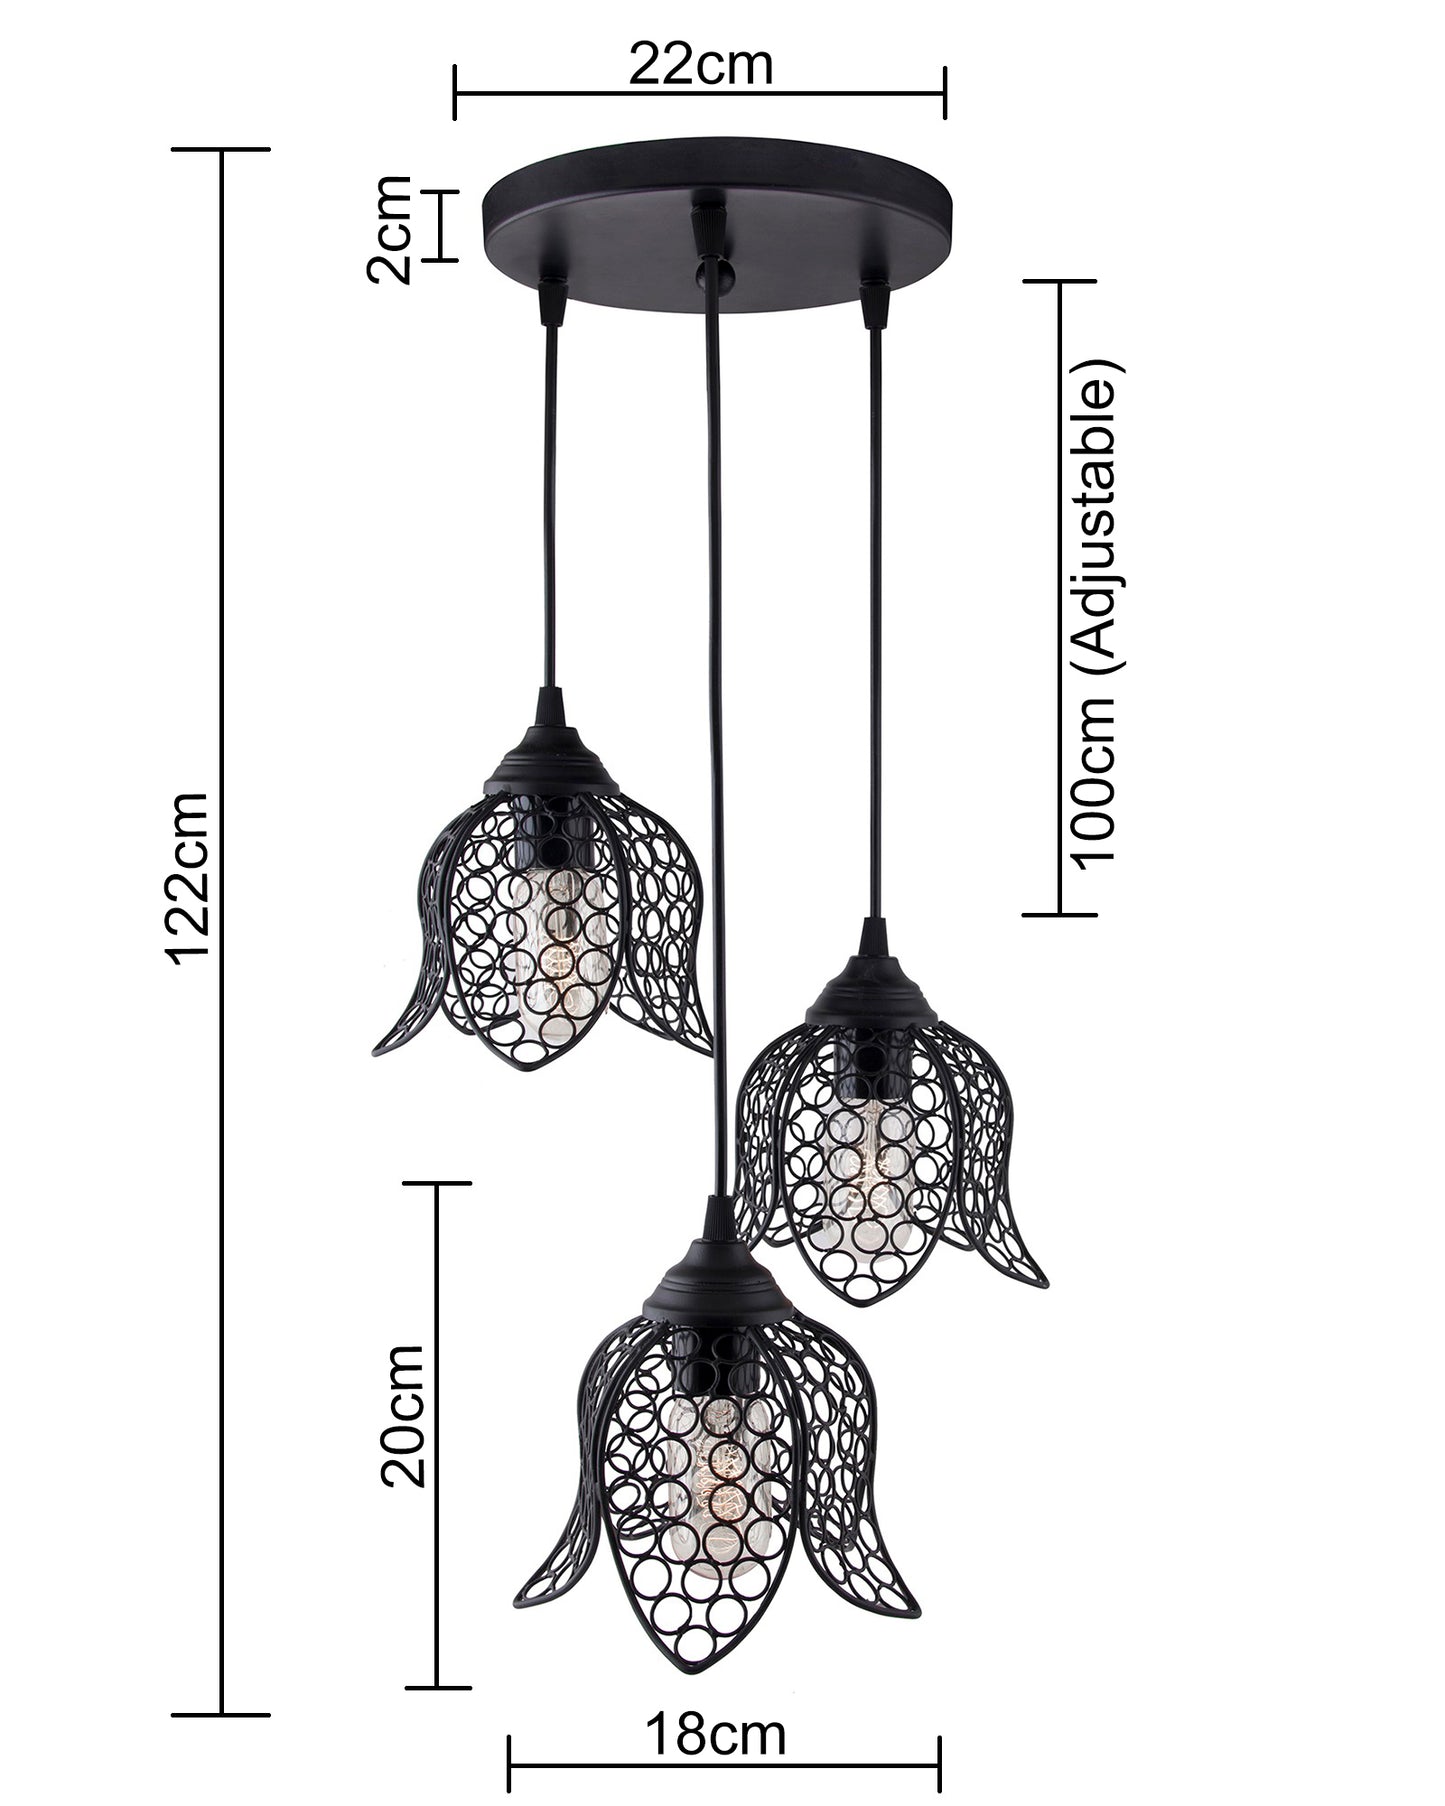 3-lights Cluster Chandelier Black Lotus Hanging Pendant Light with Braided Cord